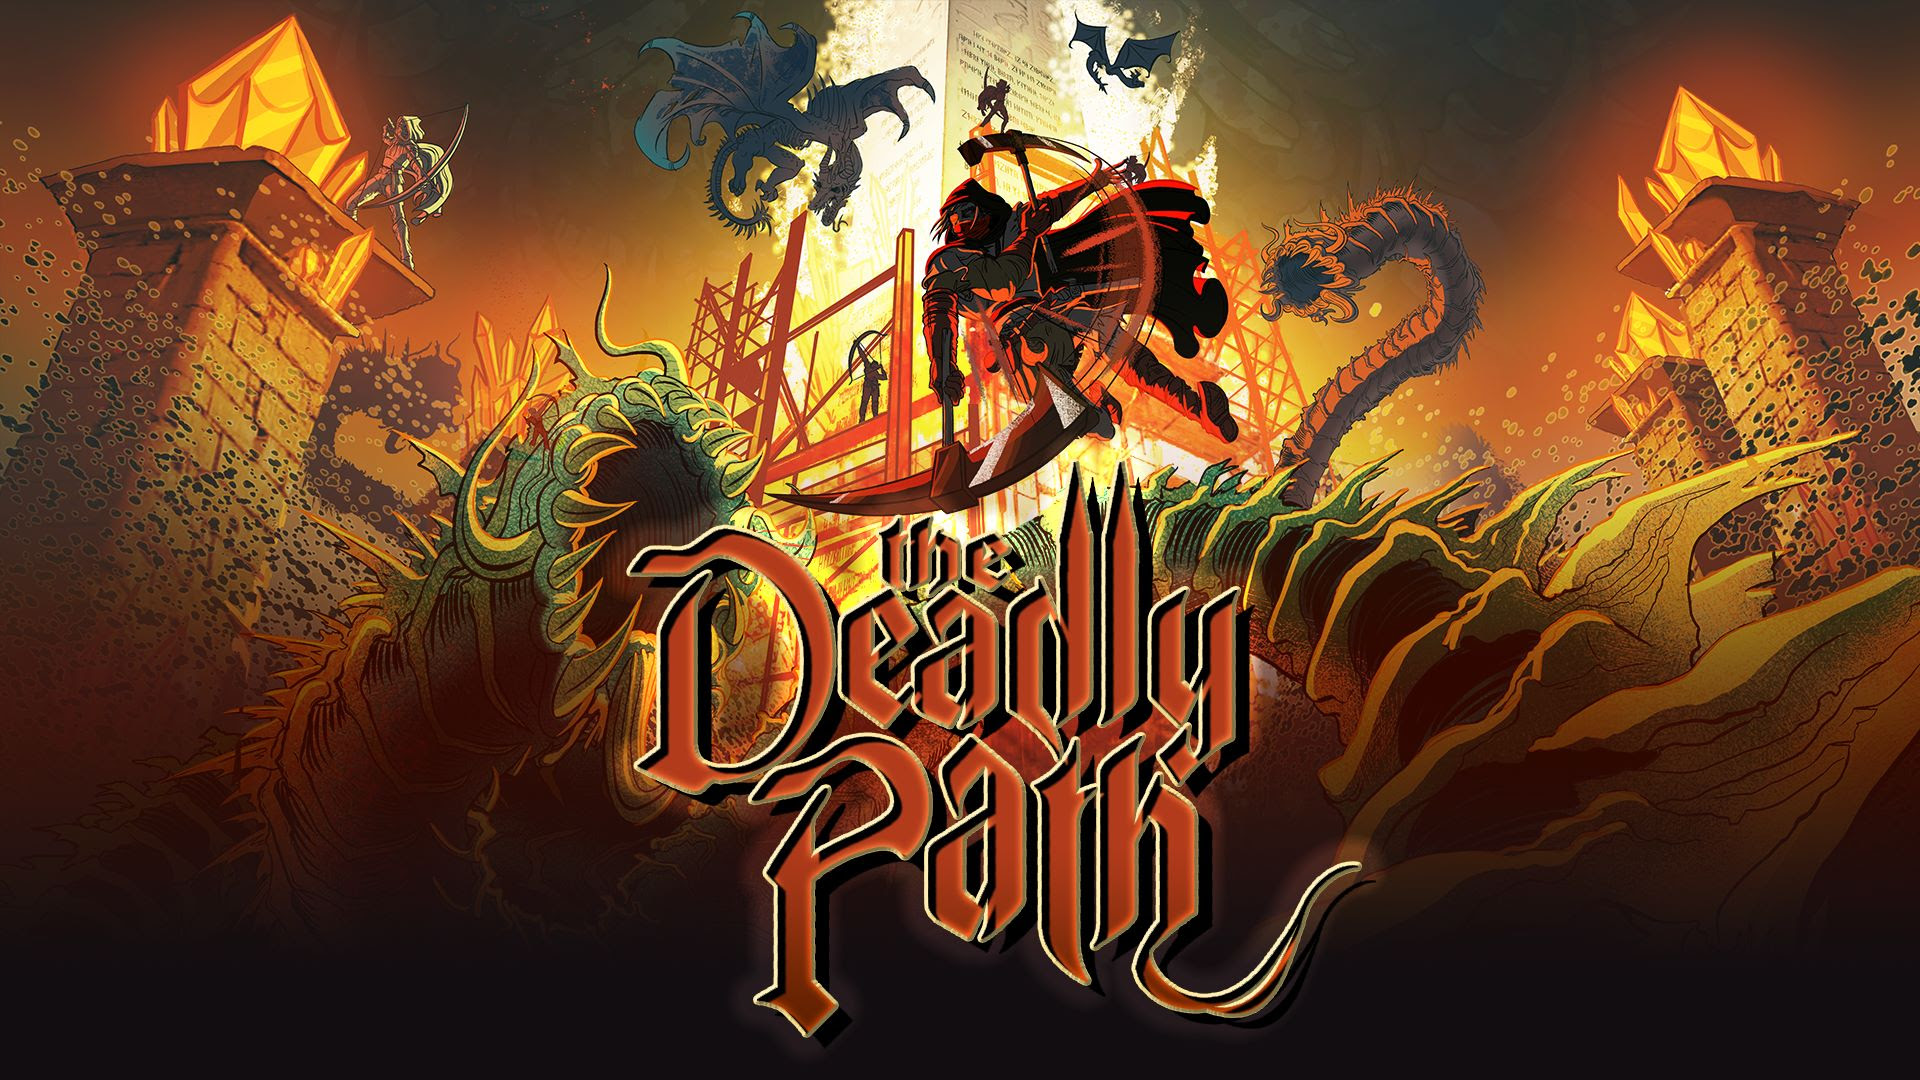 Dungeon Roguelike ‘The Deadly Path’ Coming to PC Soon; New Trailer Highlights Gameplay